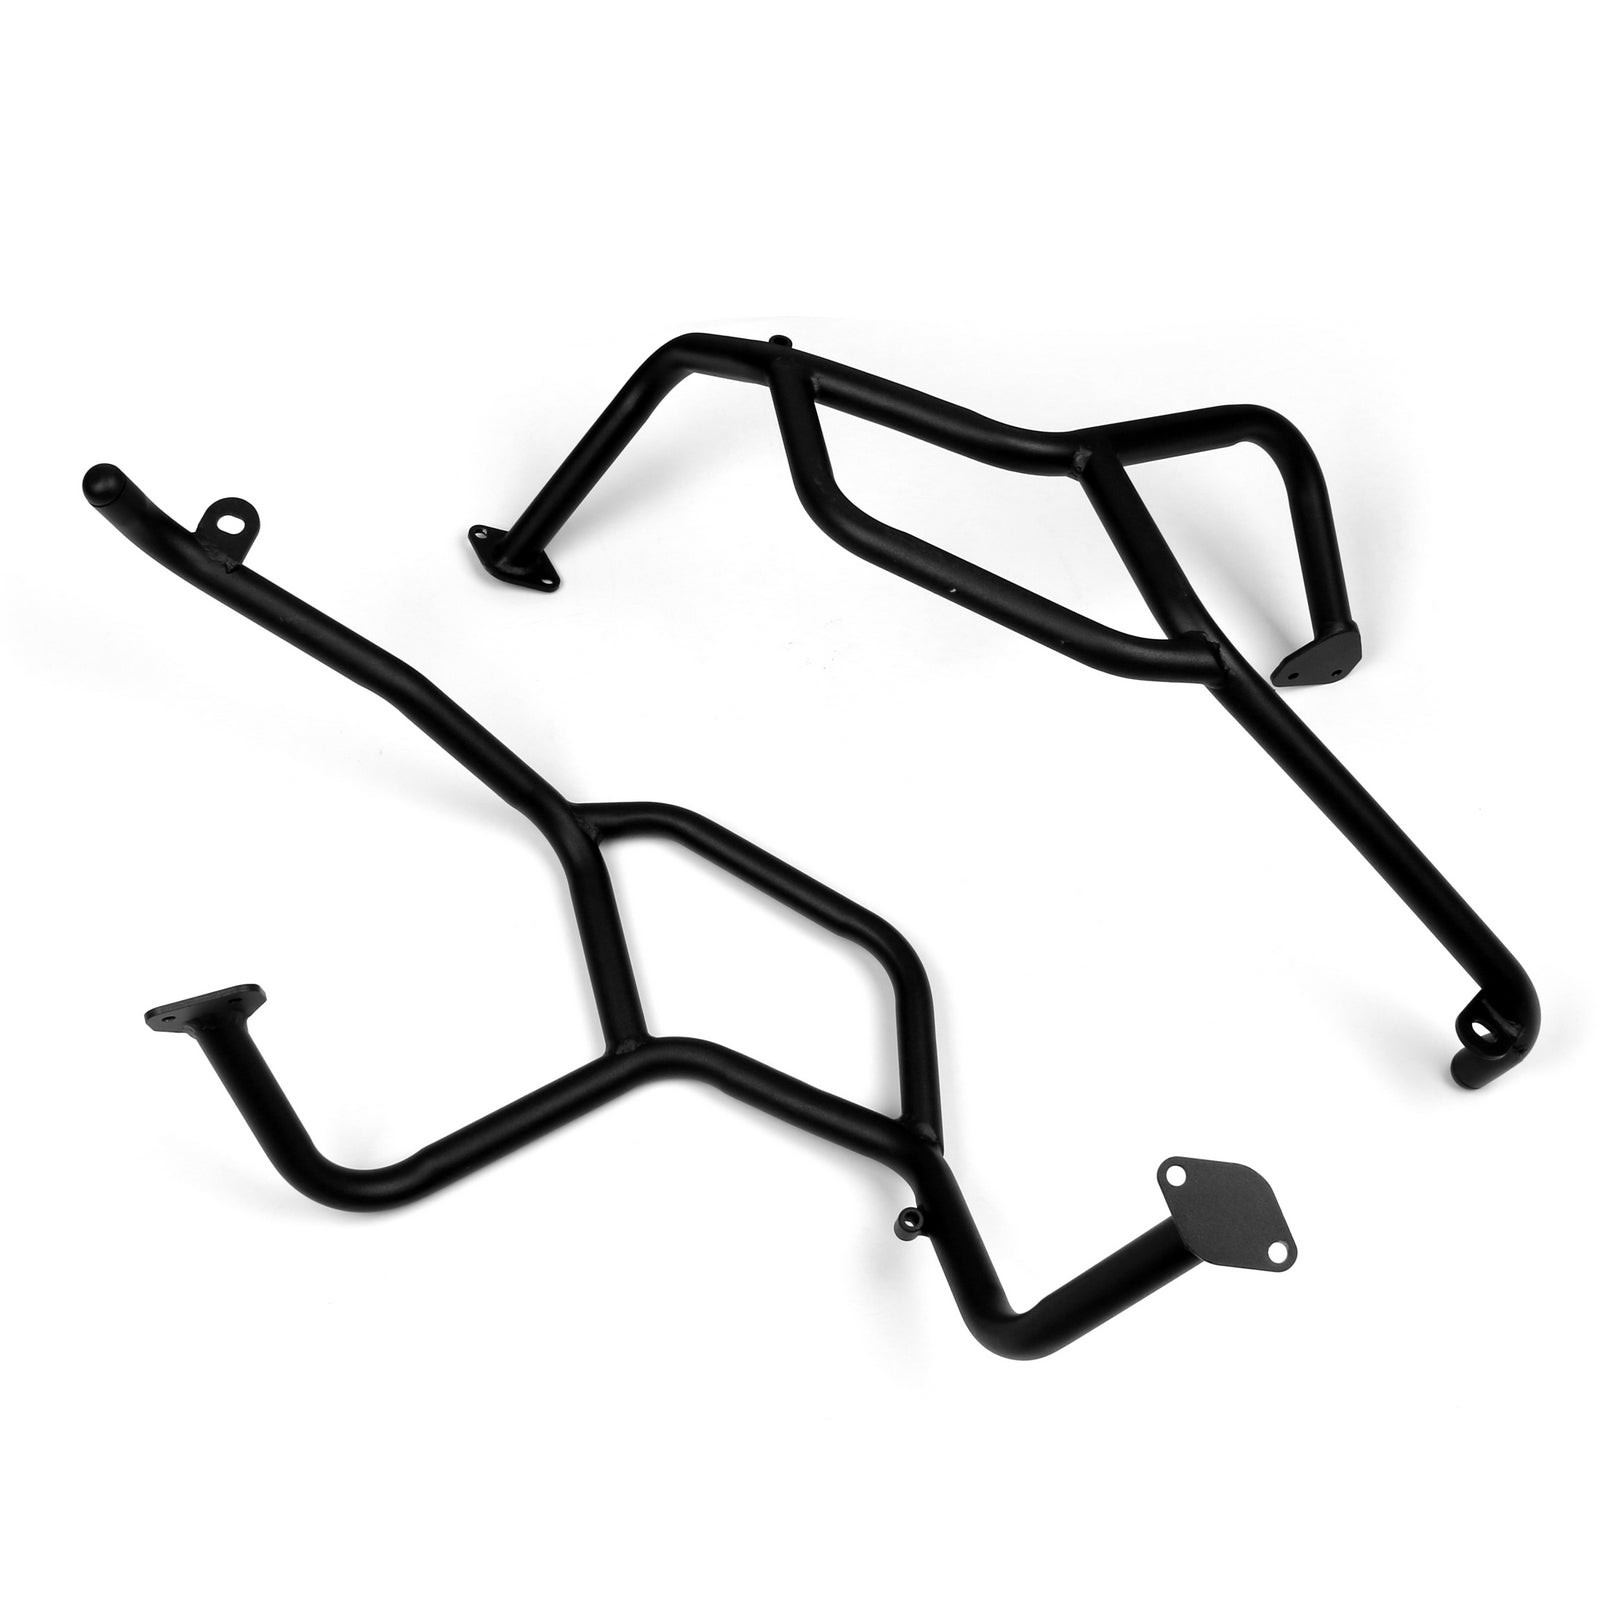 Crash bars Engine Protection Upper For BMW F800GS F700GS F650GS 2008-2017 Black Generic